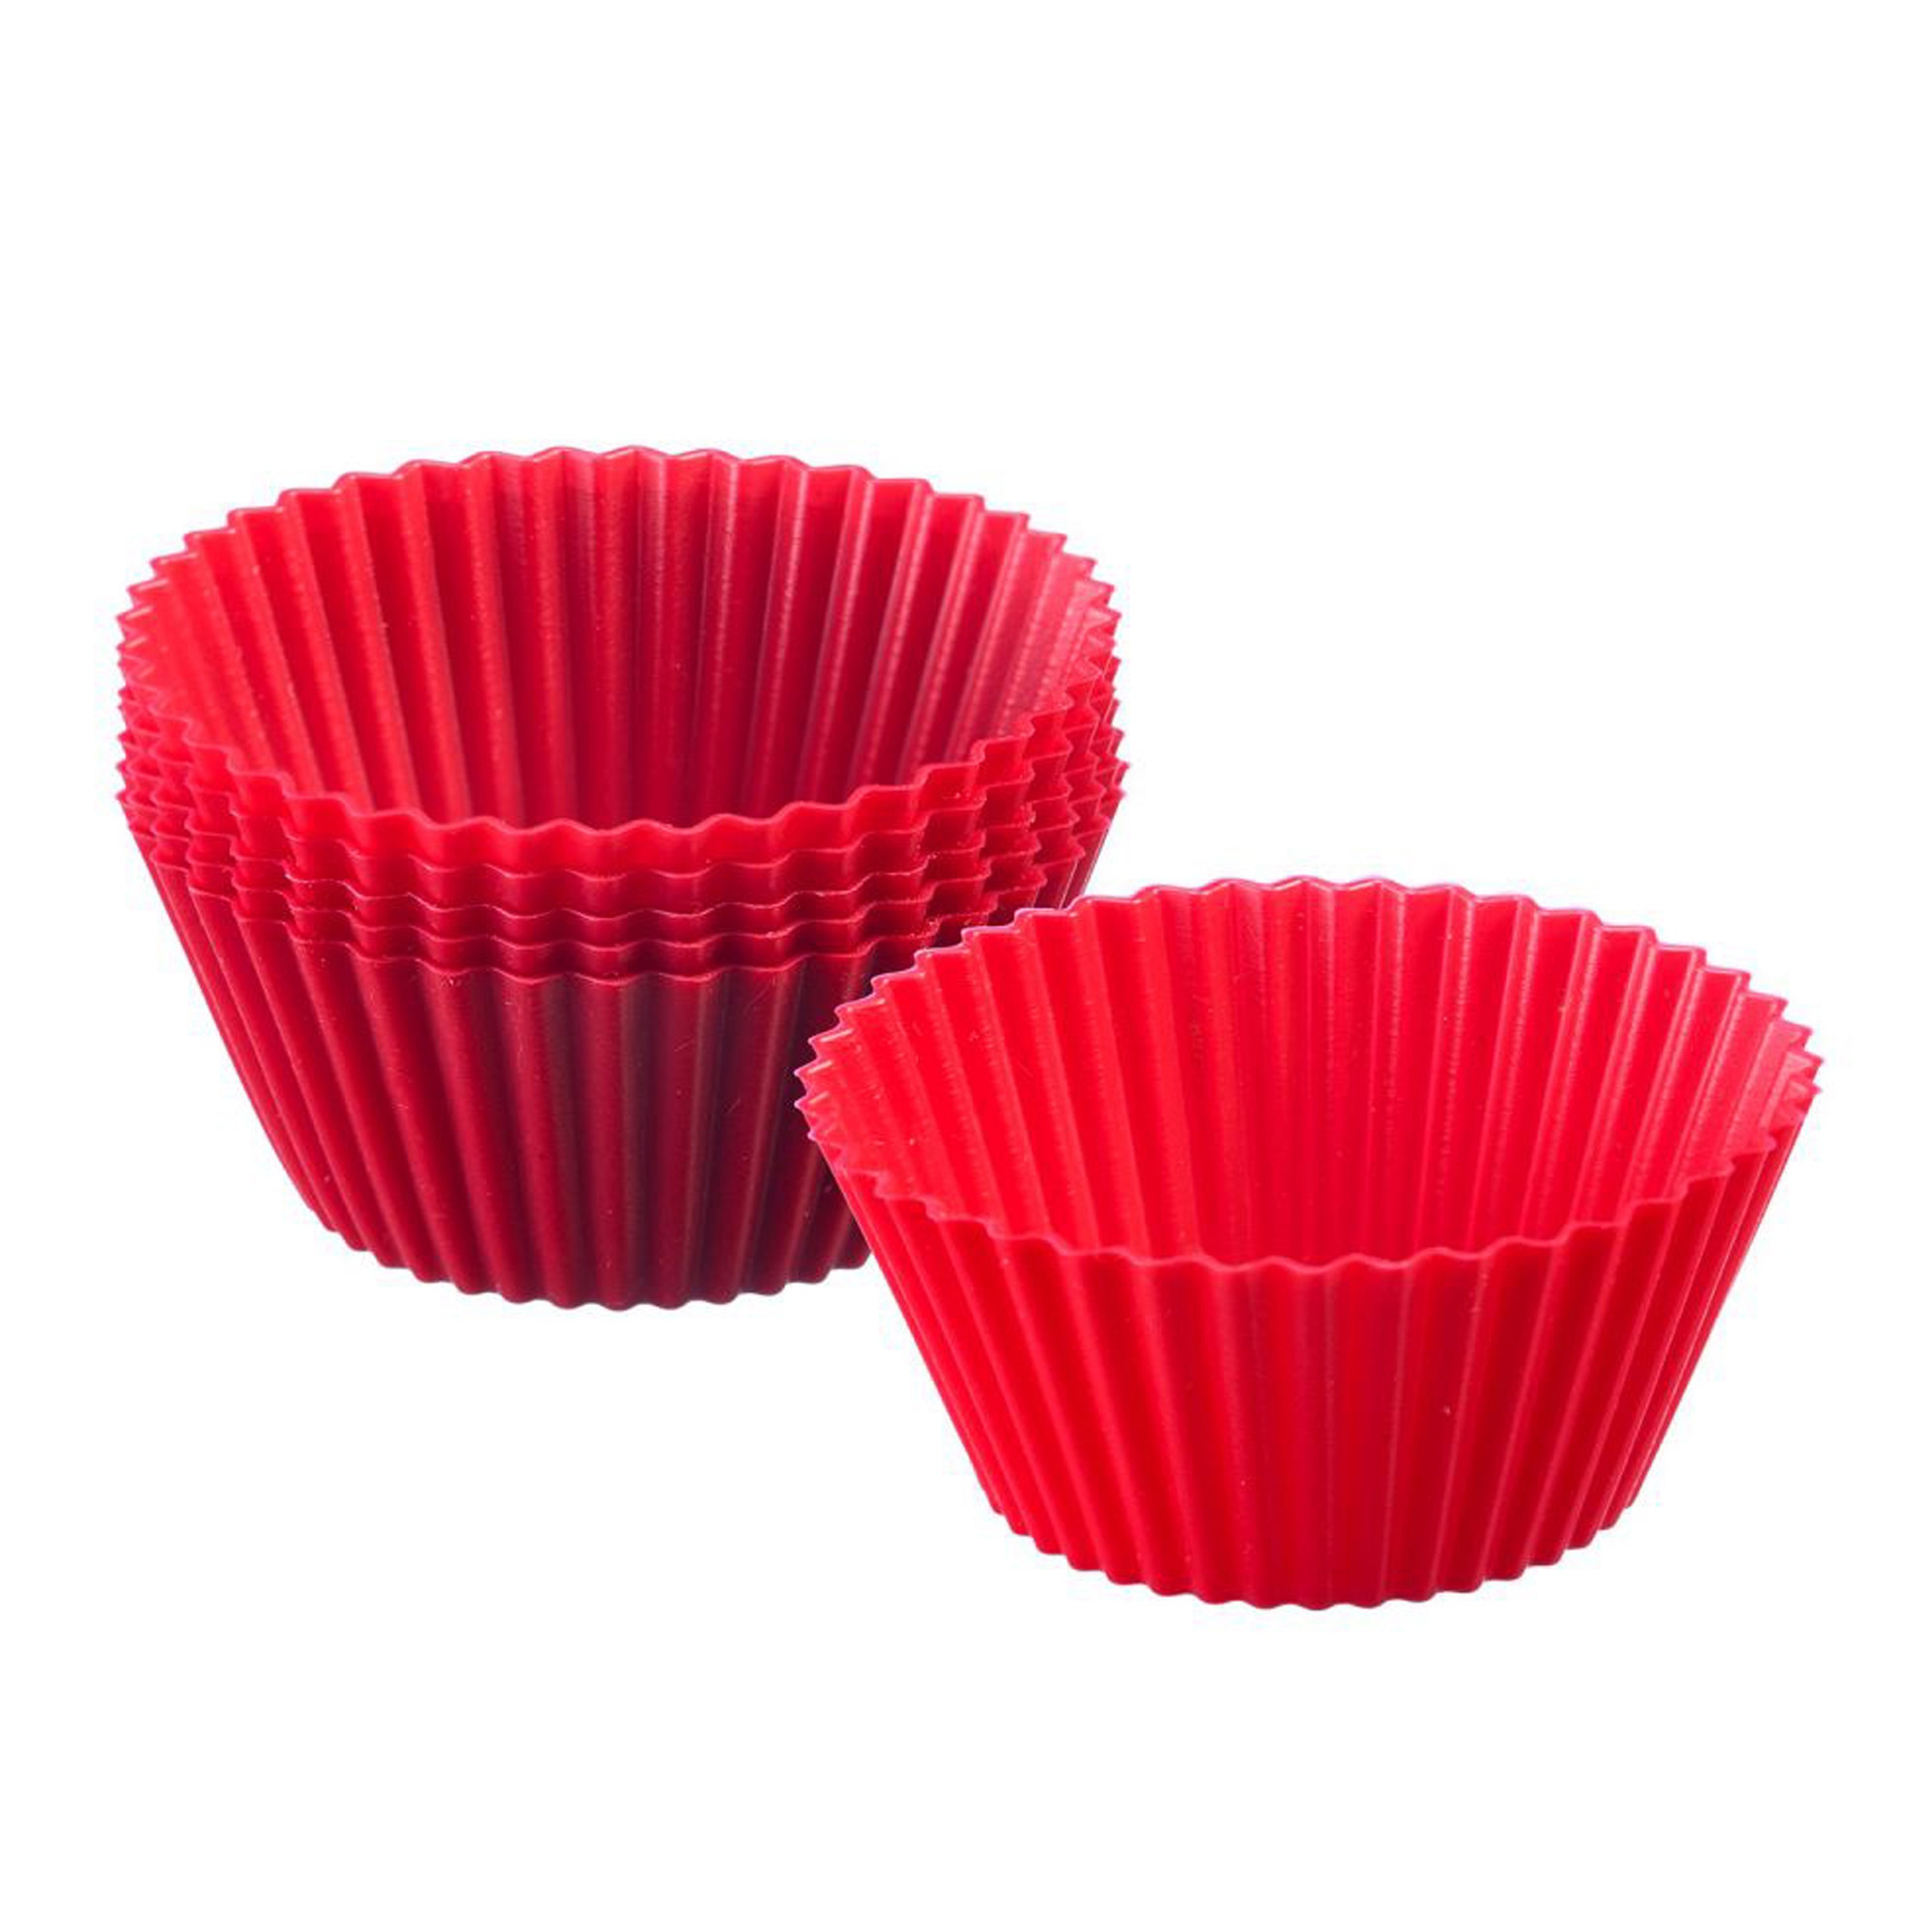 Westmark - 6 silicone muffin moulds, ø 7 cm, red